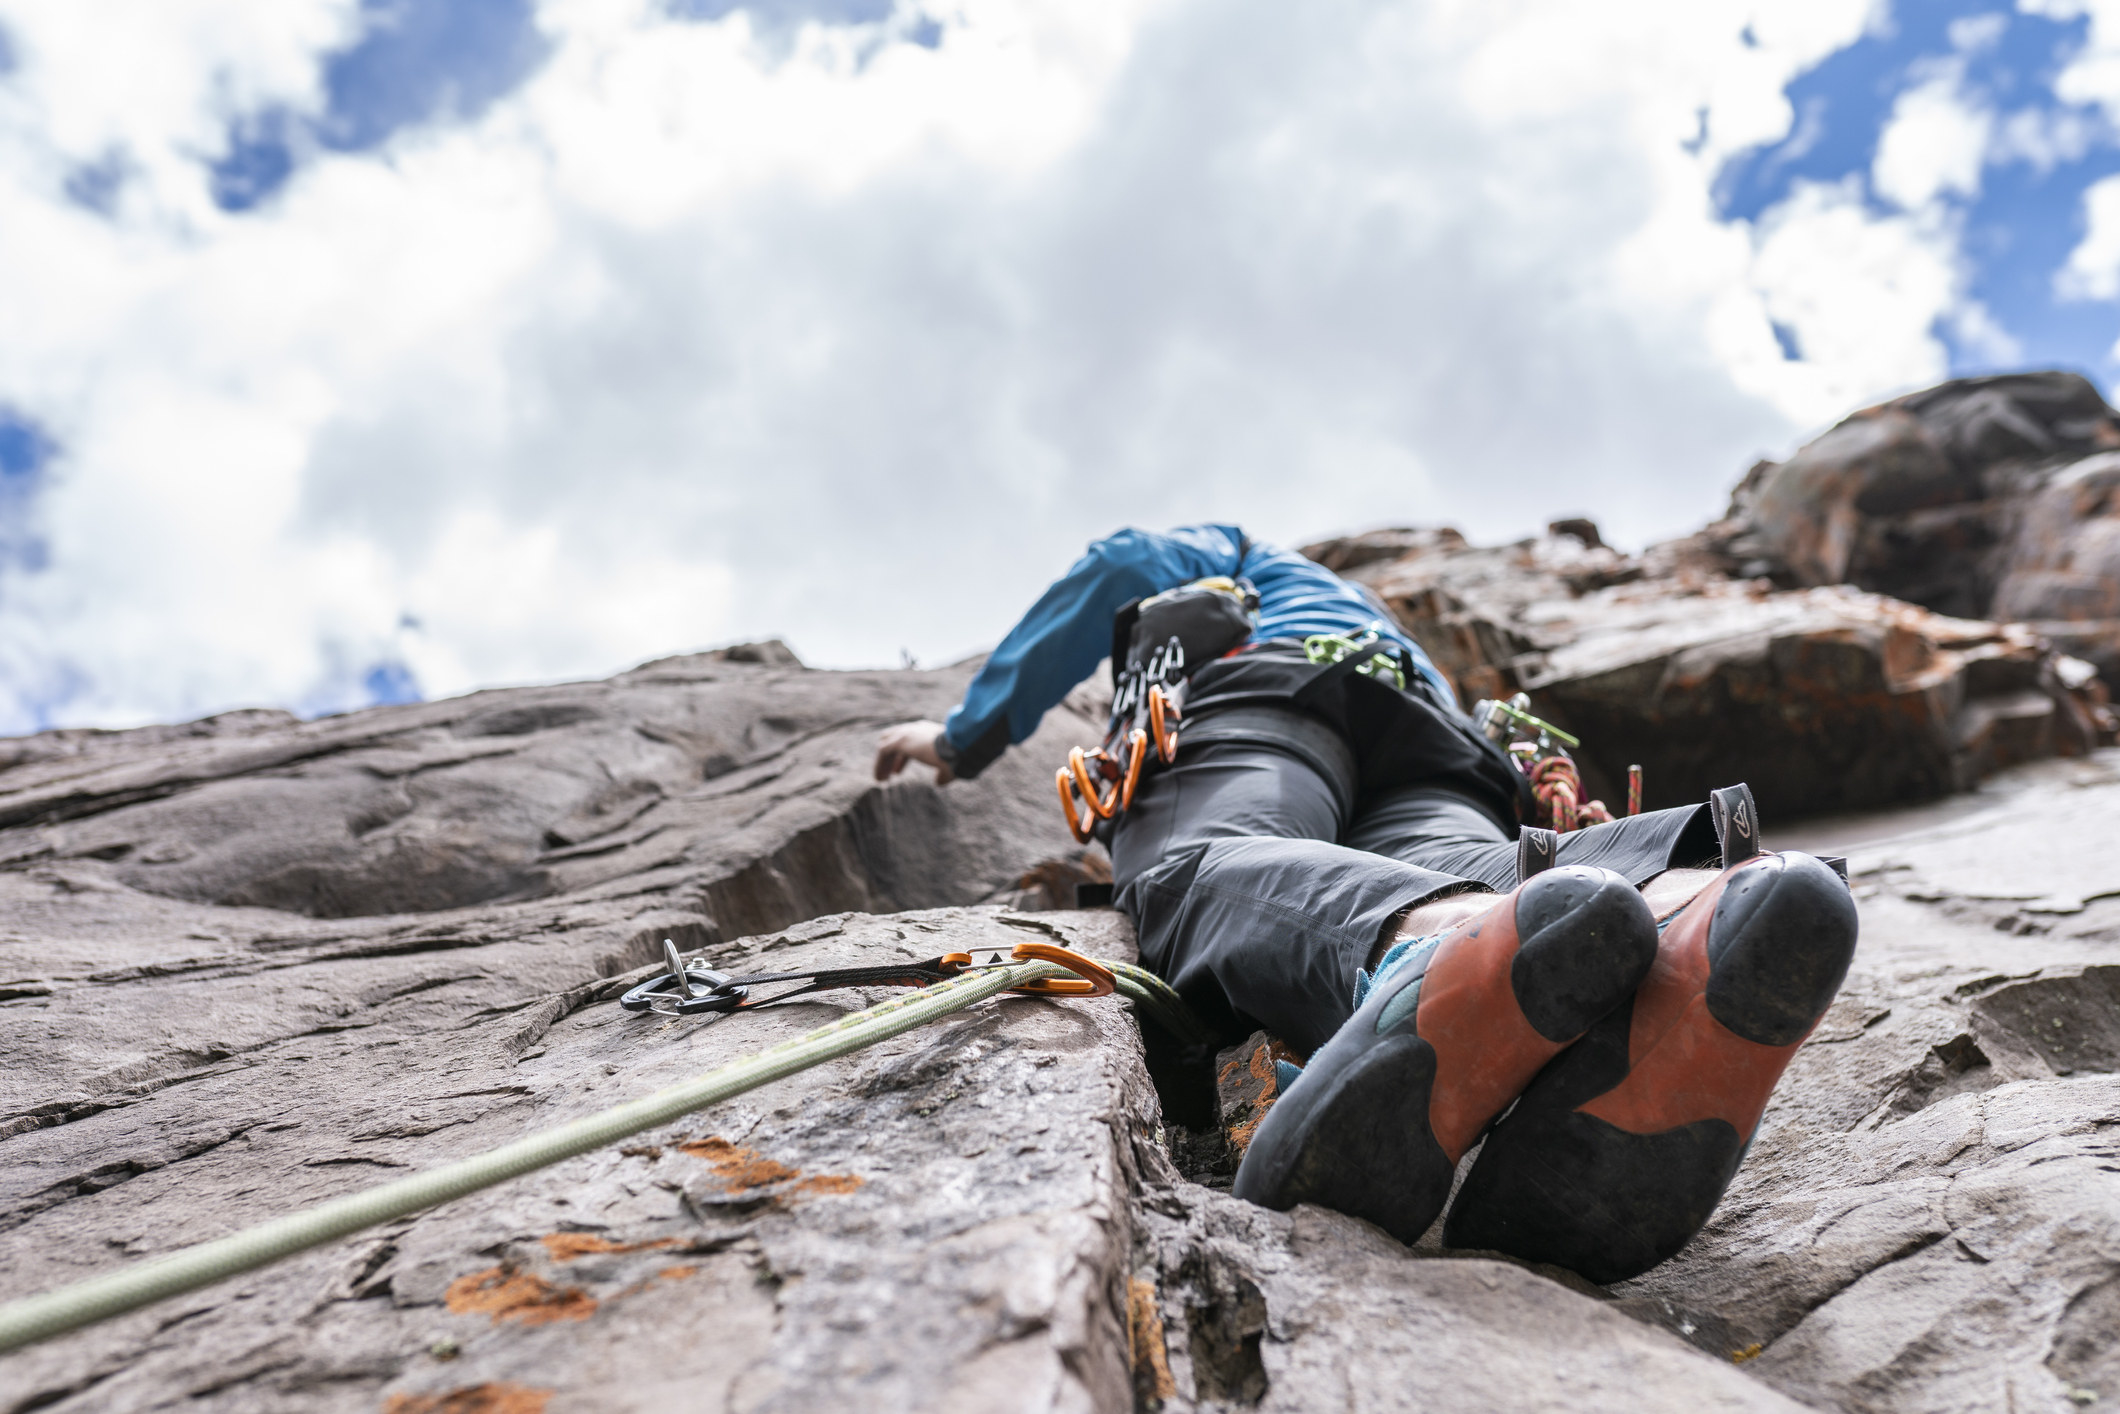 A stock image of a person climbing up the face of a rock